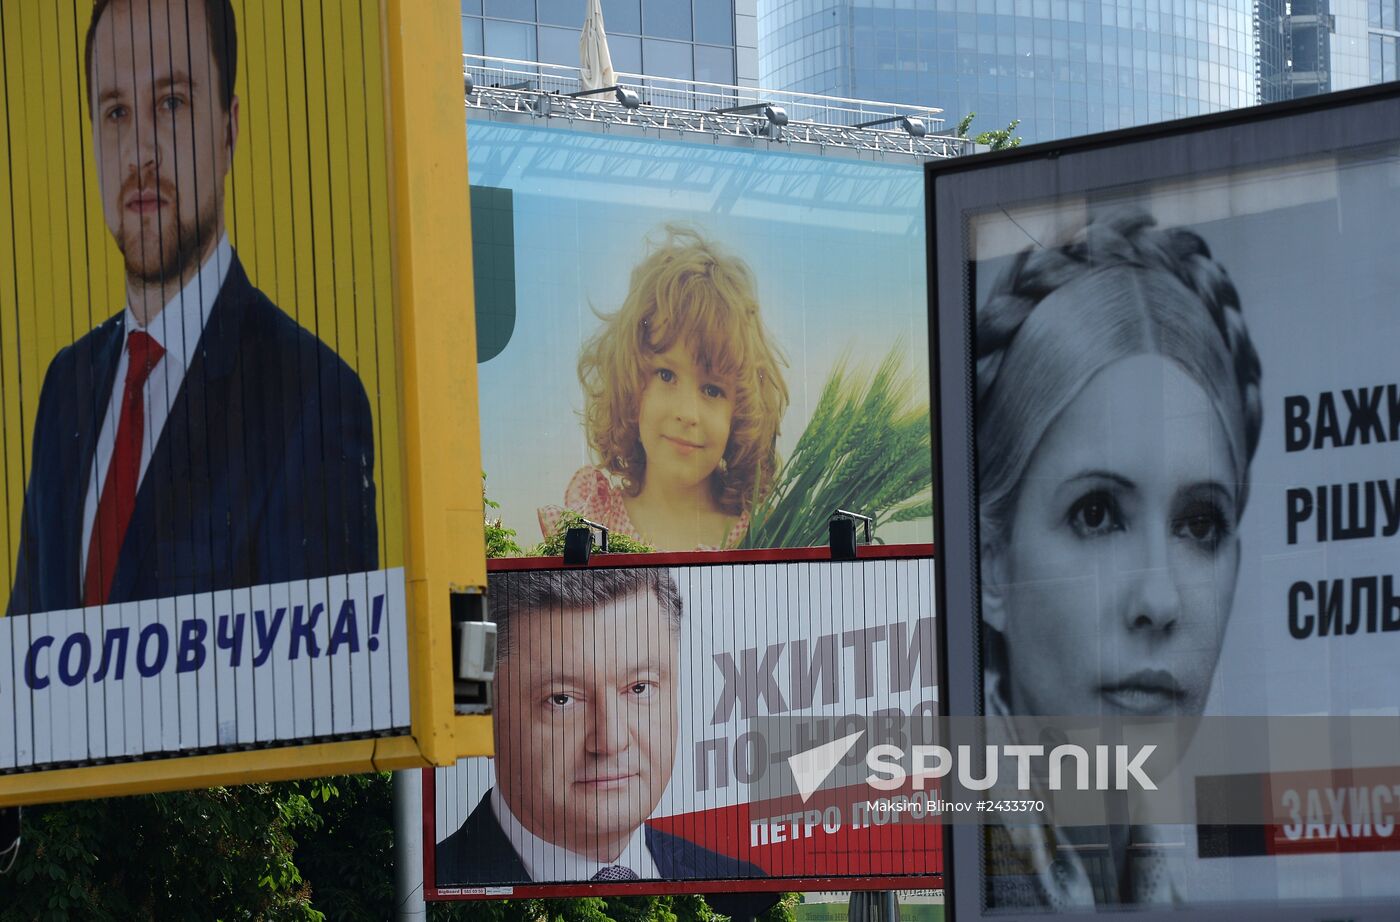 Campaign posters in Kiev